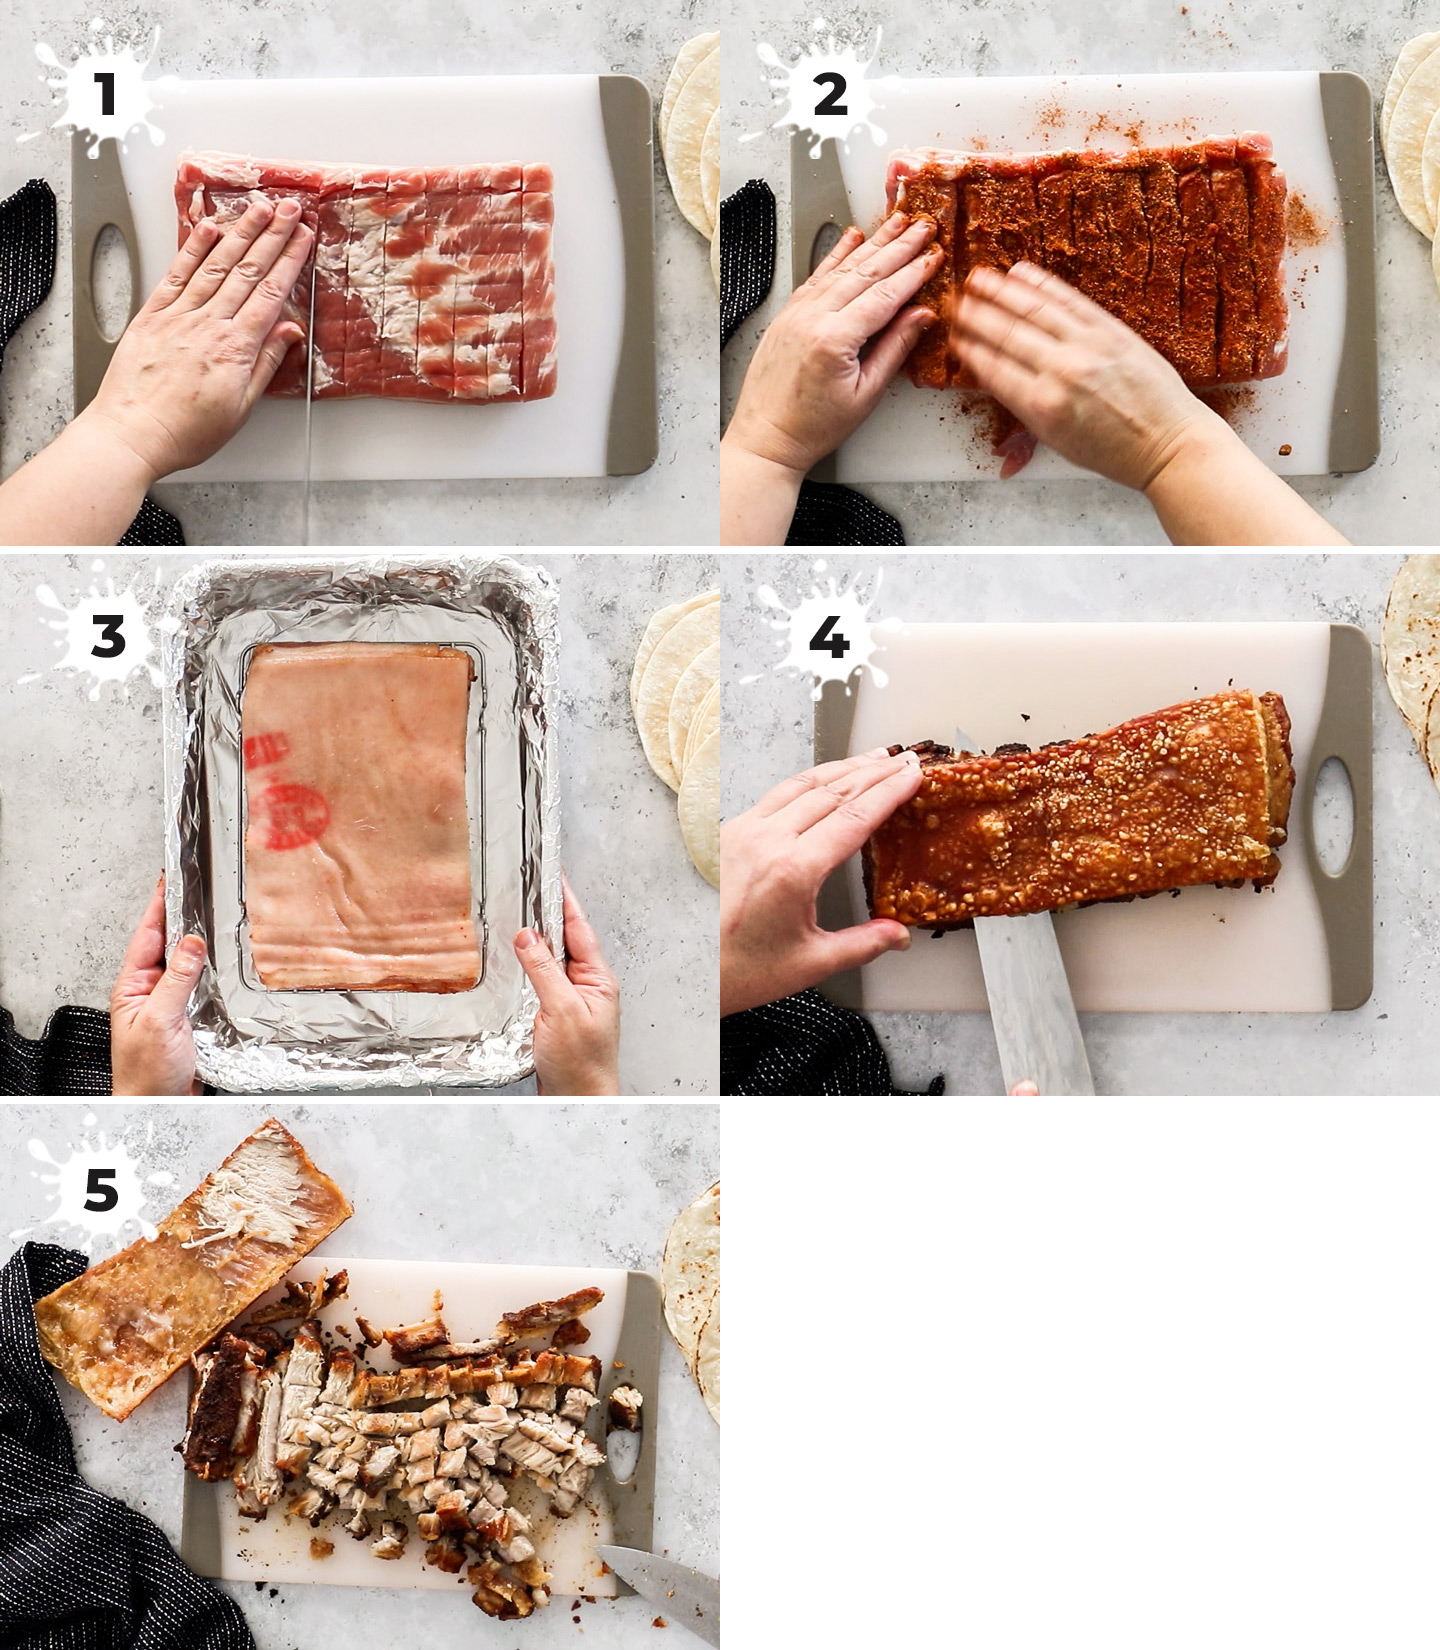 A collage showing how to prepare and cook the pork belly.